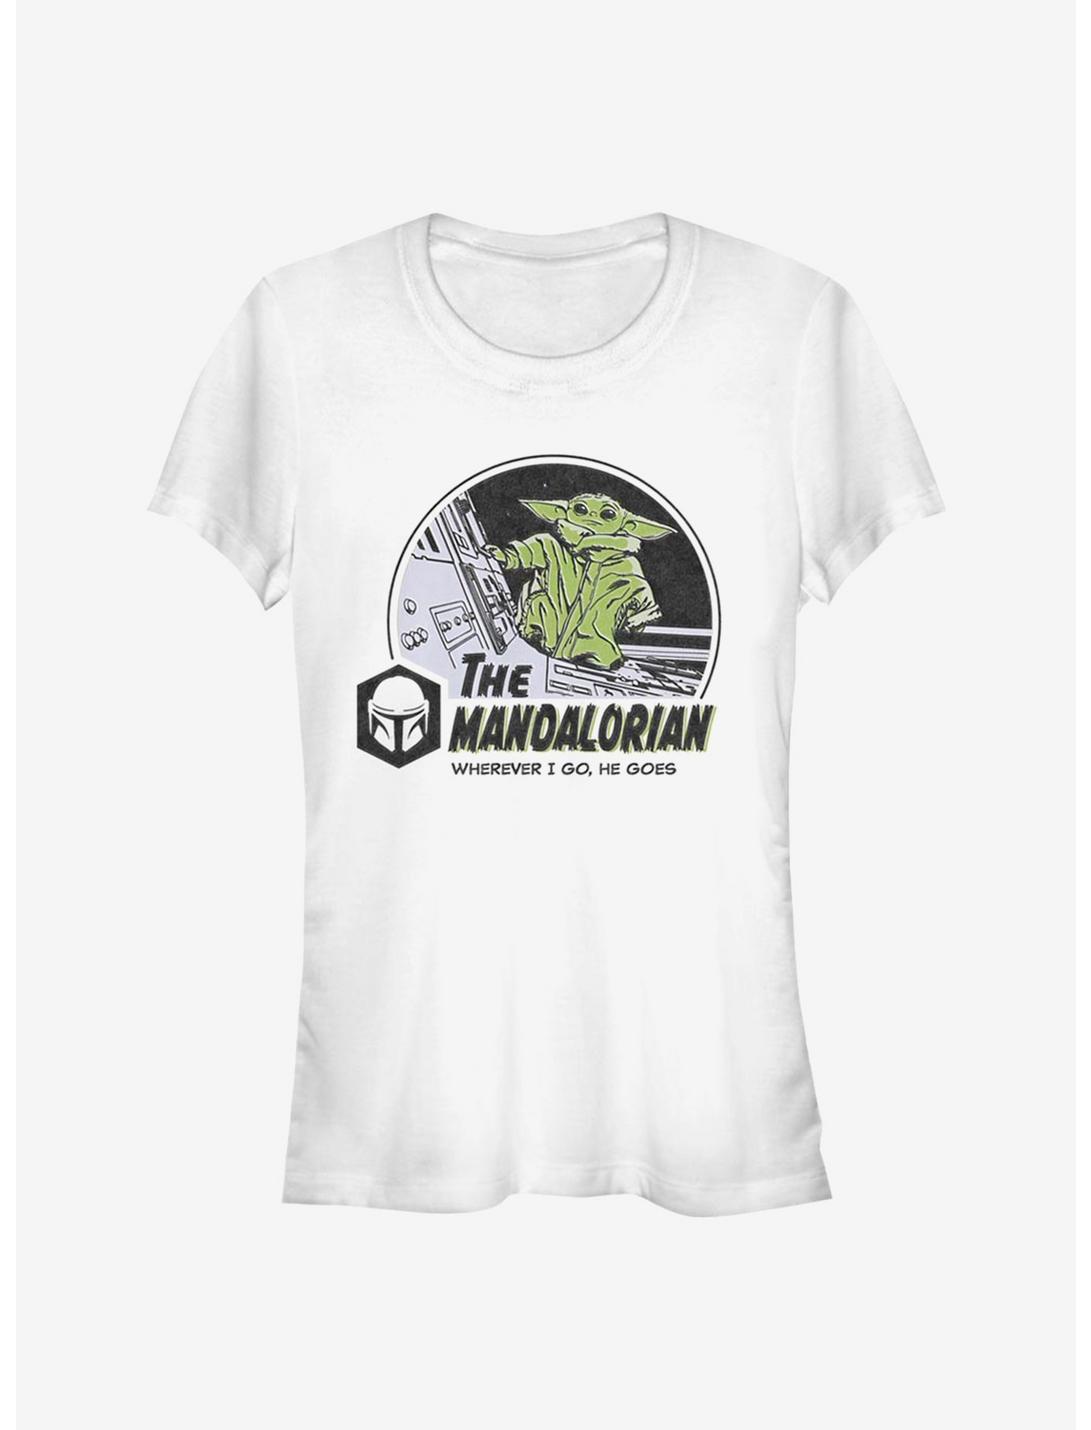 Star Wars The Mandalorian The Child In Space Girls T-Shirt, WHITE, hi-res